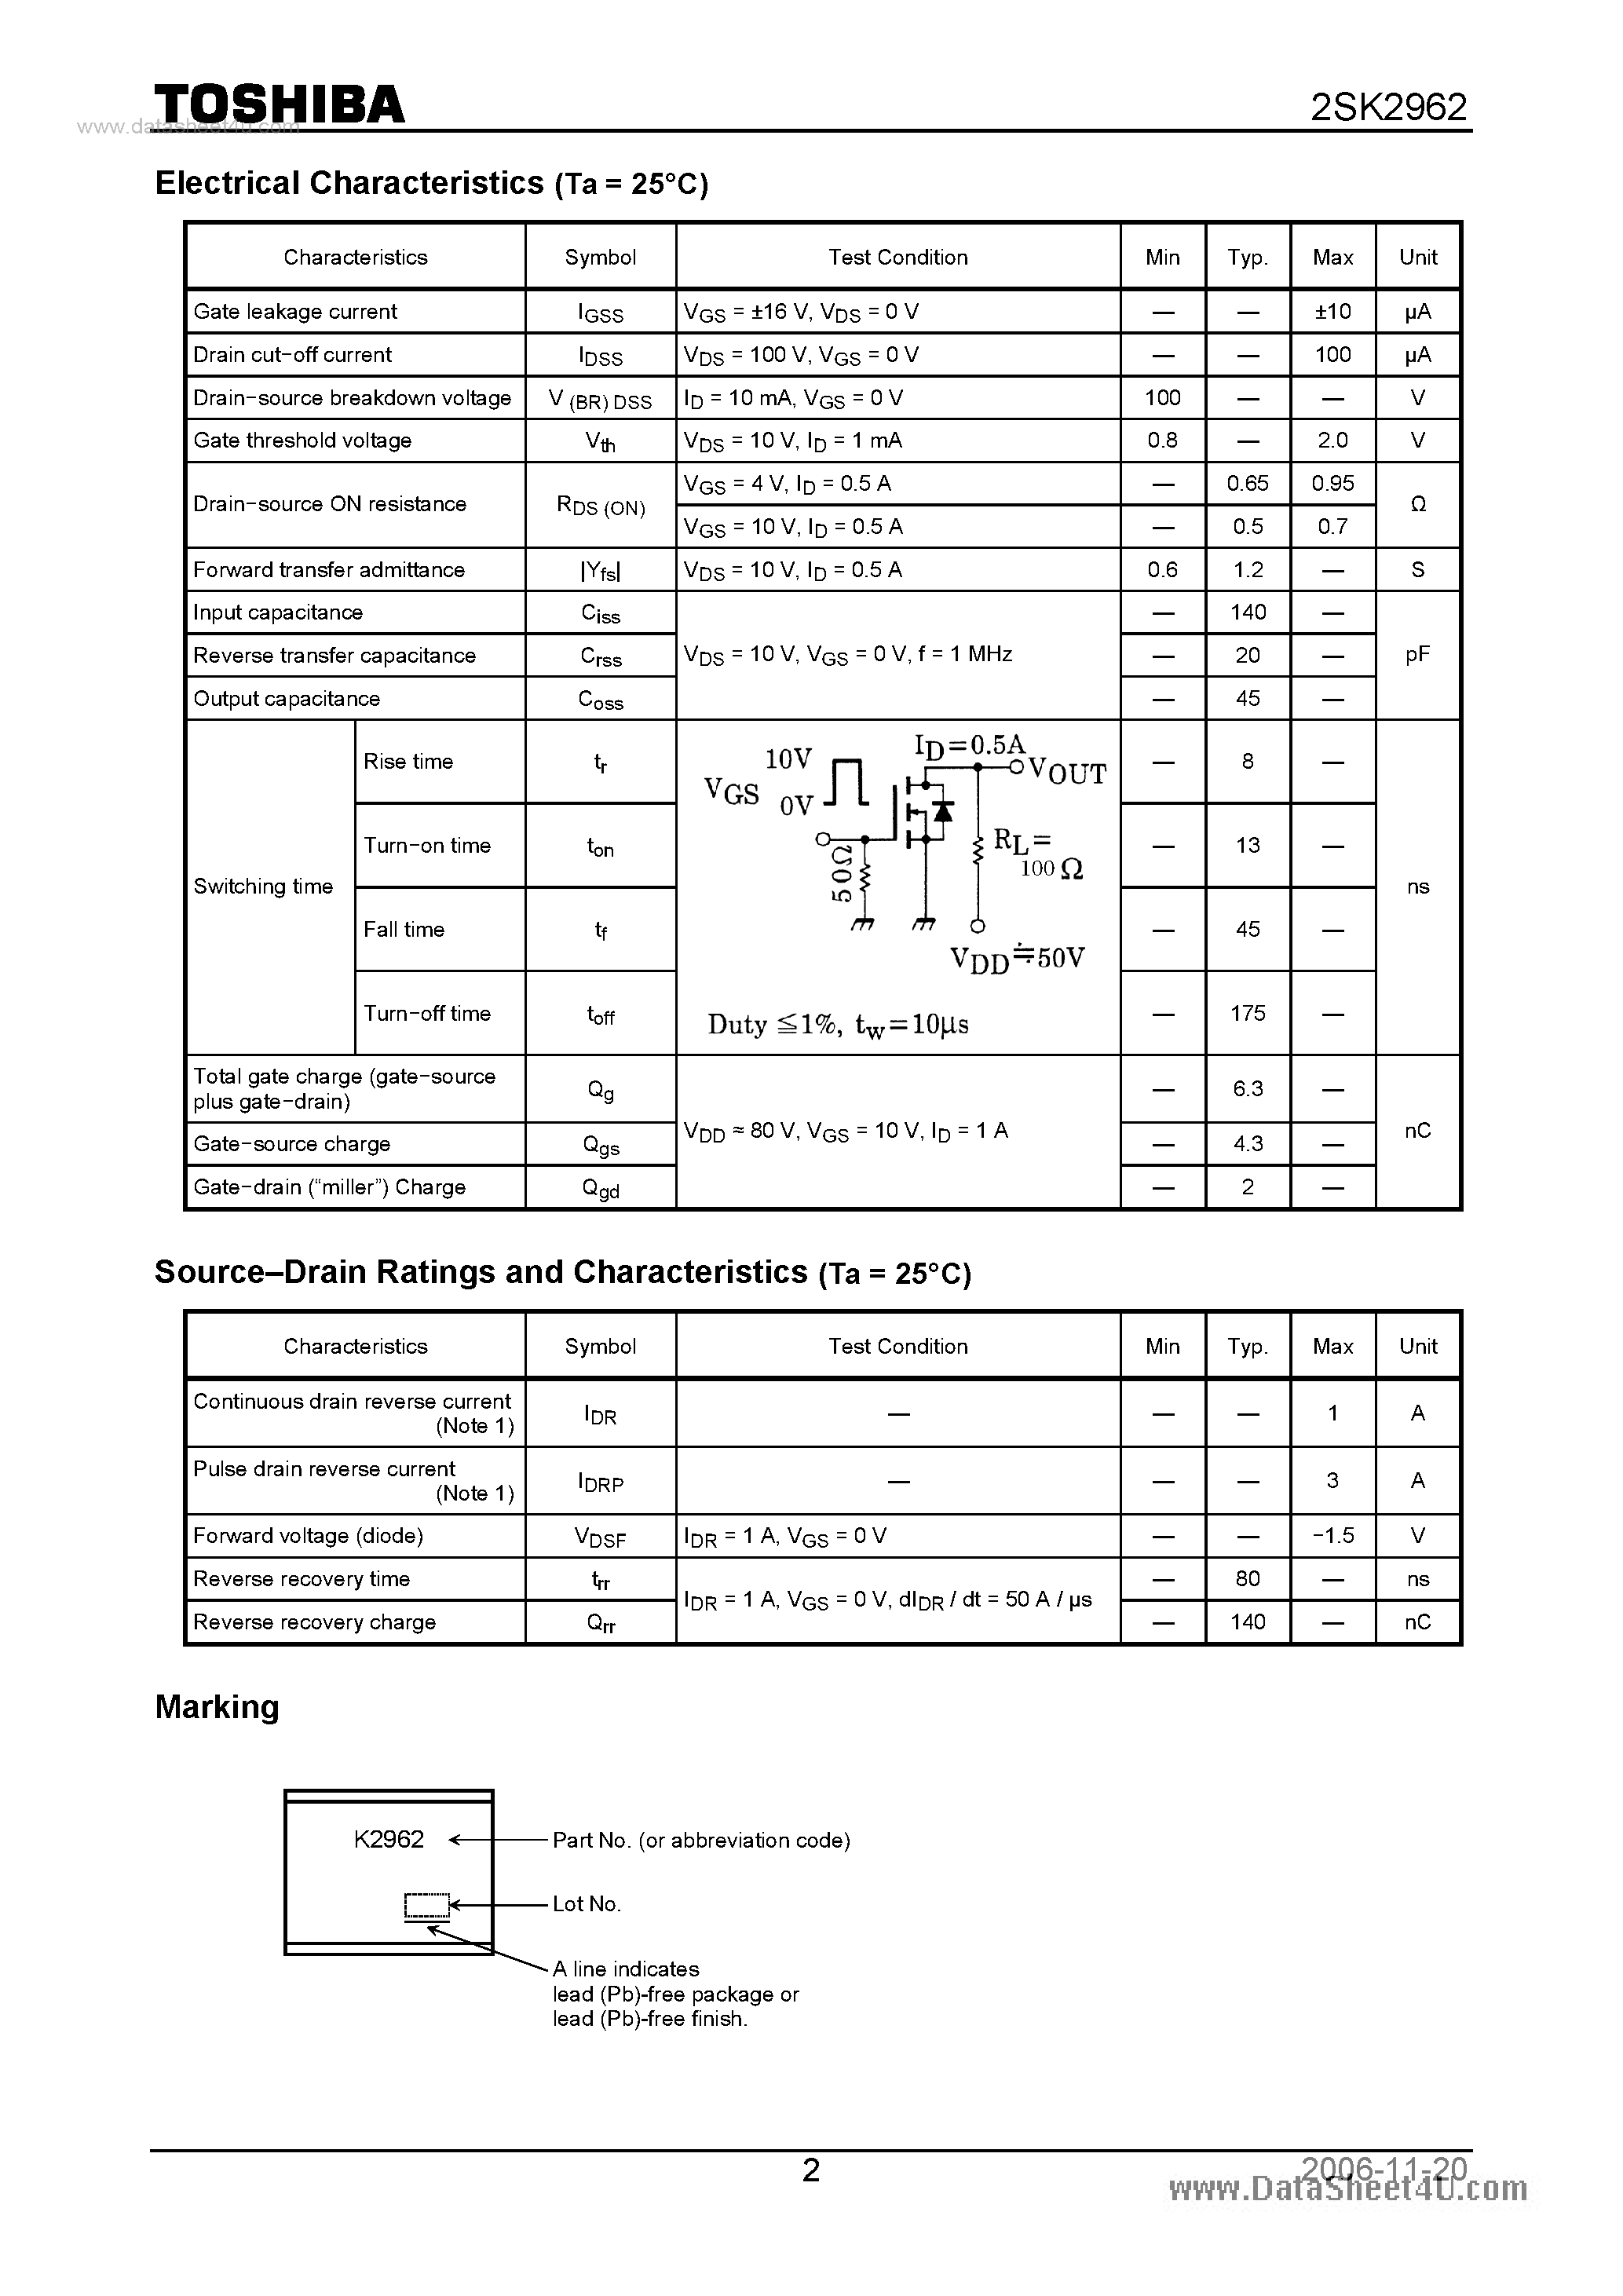 Datasheet K2962 - Search -----> 2SK2962 page 2